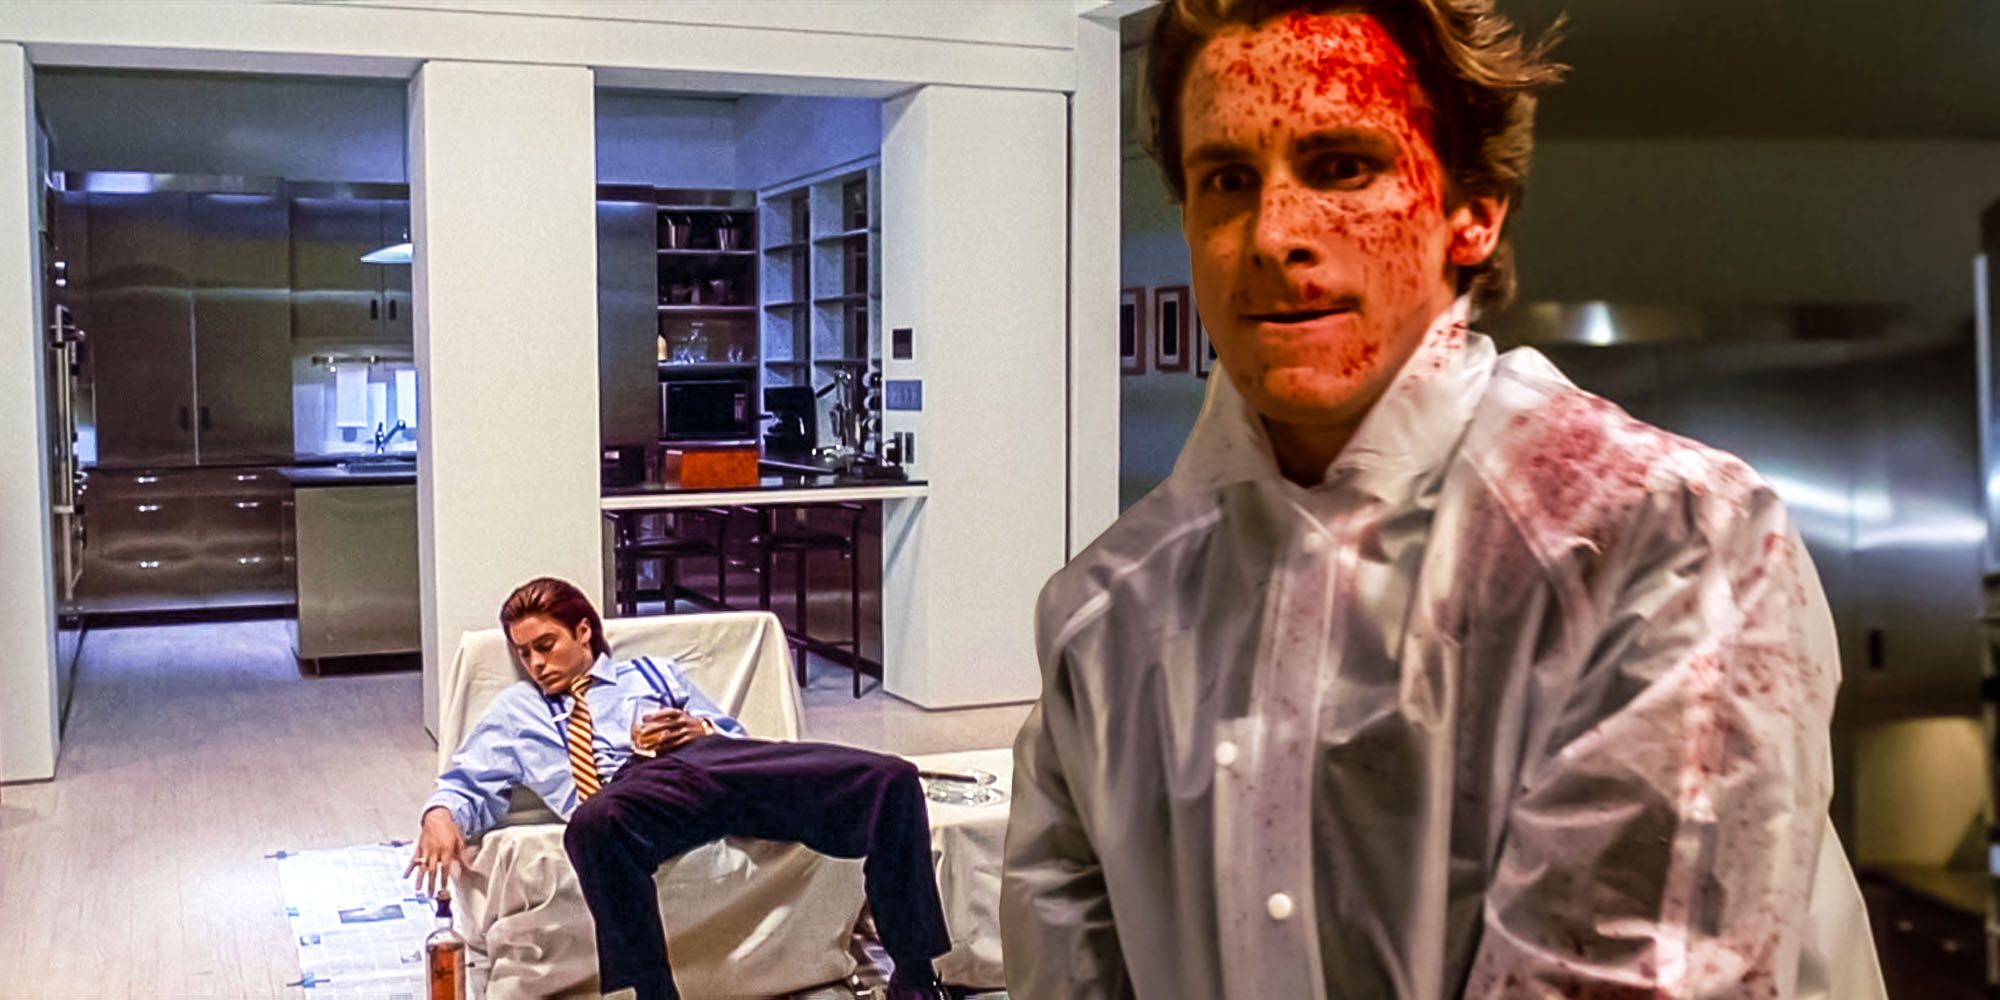 American Psycho apartment was clean christian Bale